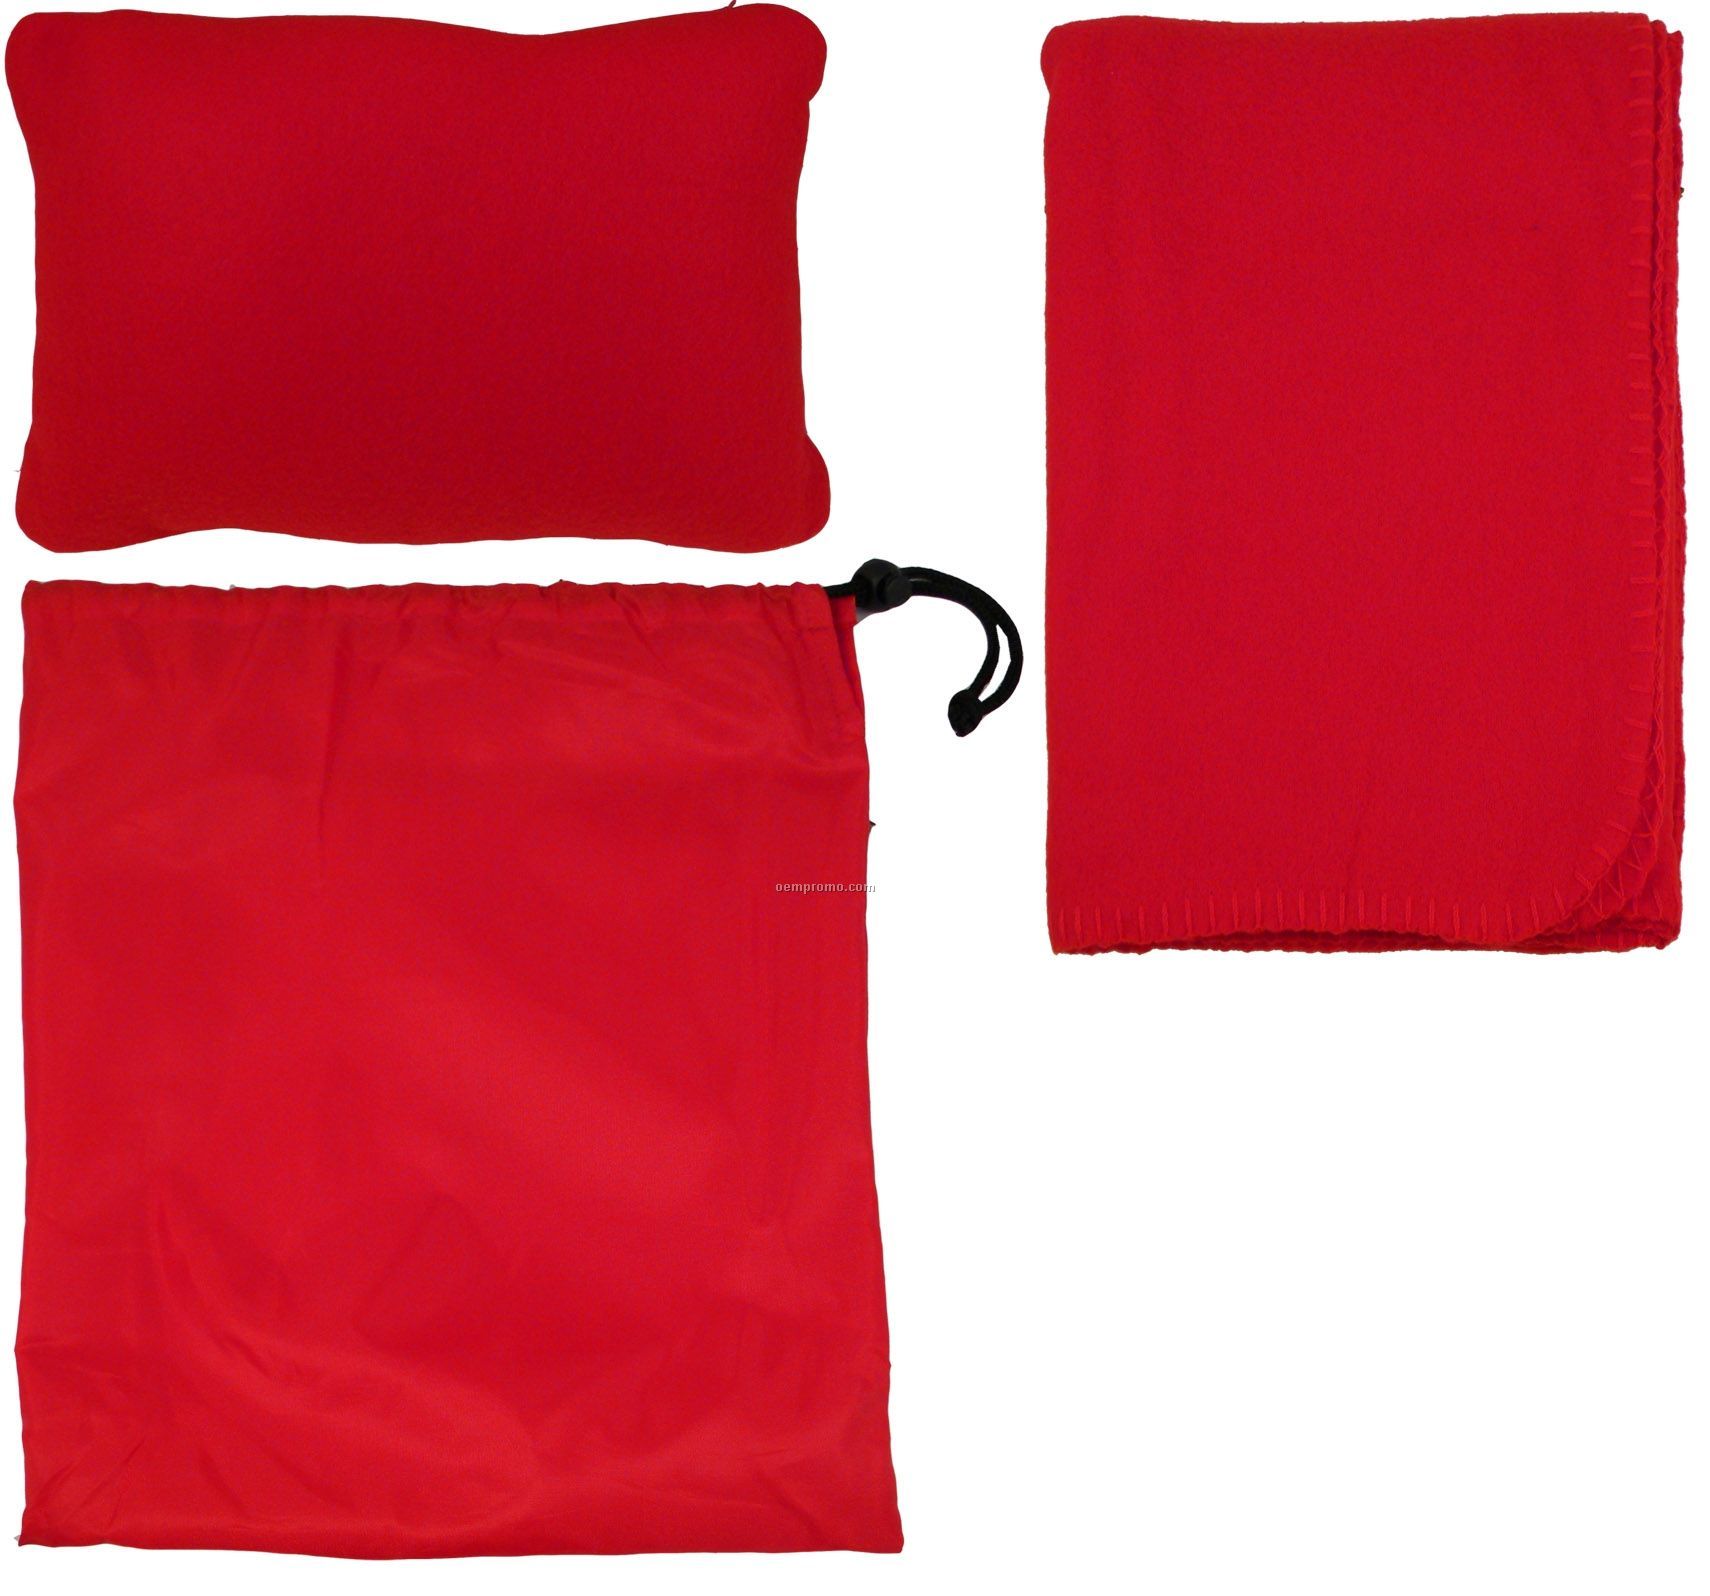 Travel Set - Blanket/Pillow And Nylon Bag - All In One (Overseas 6-7 Week)